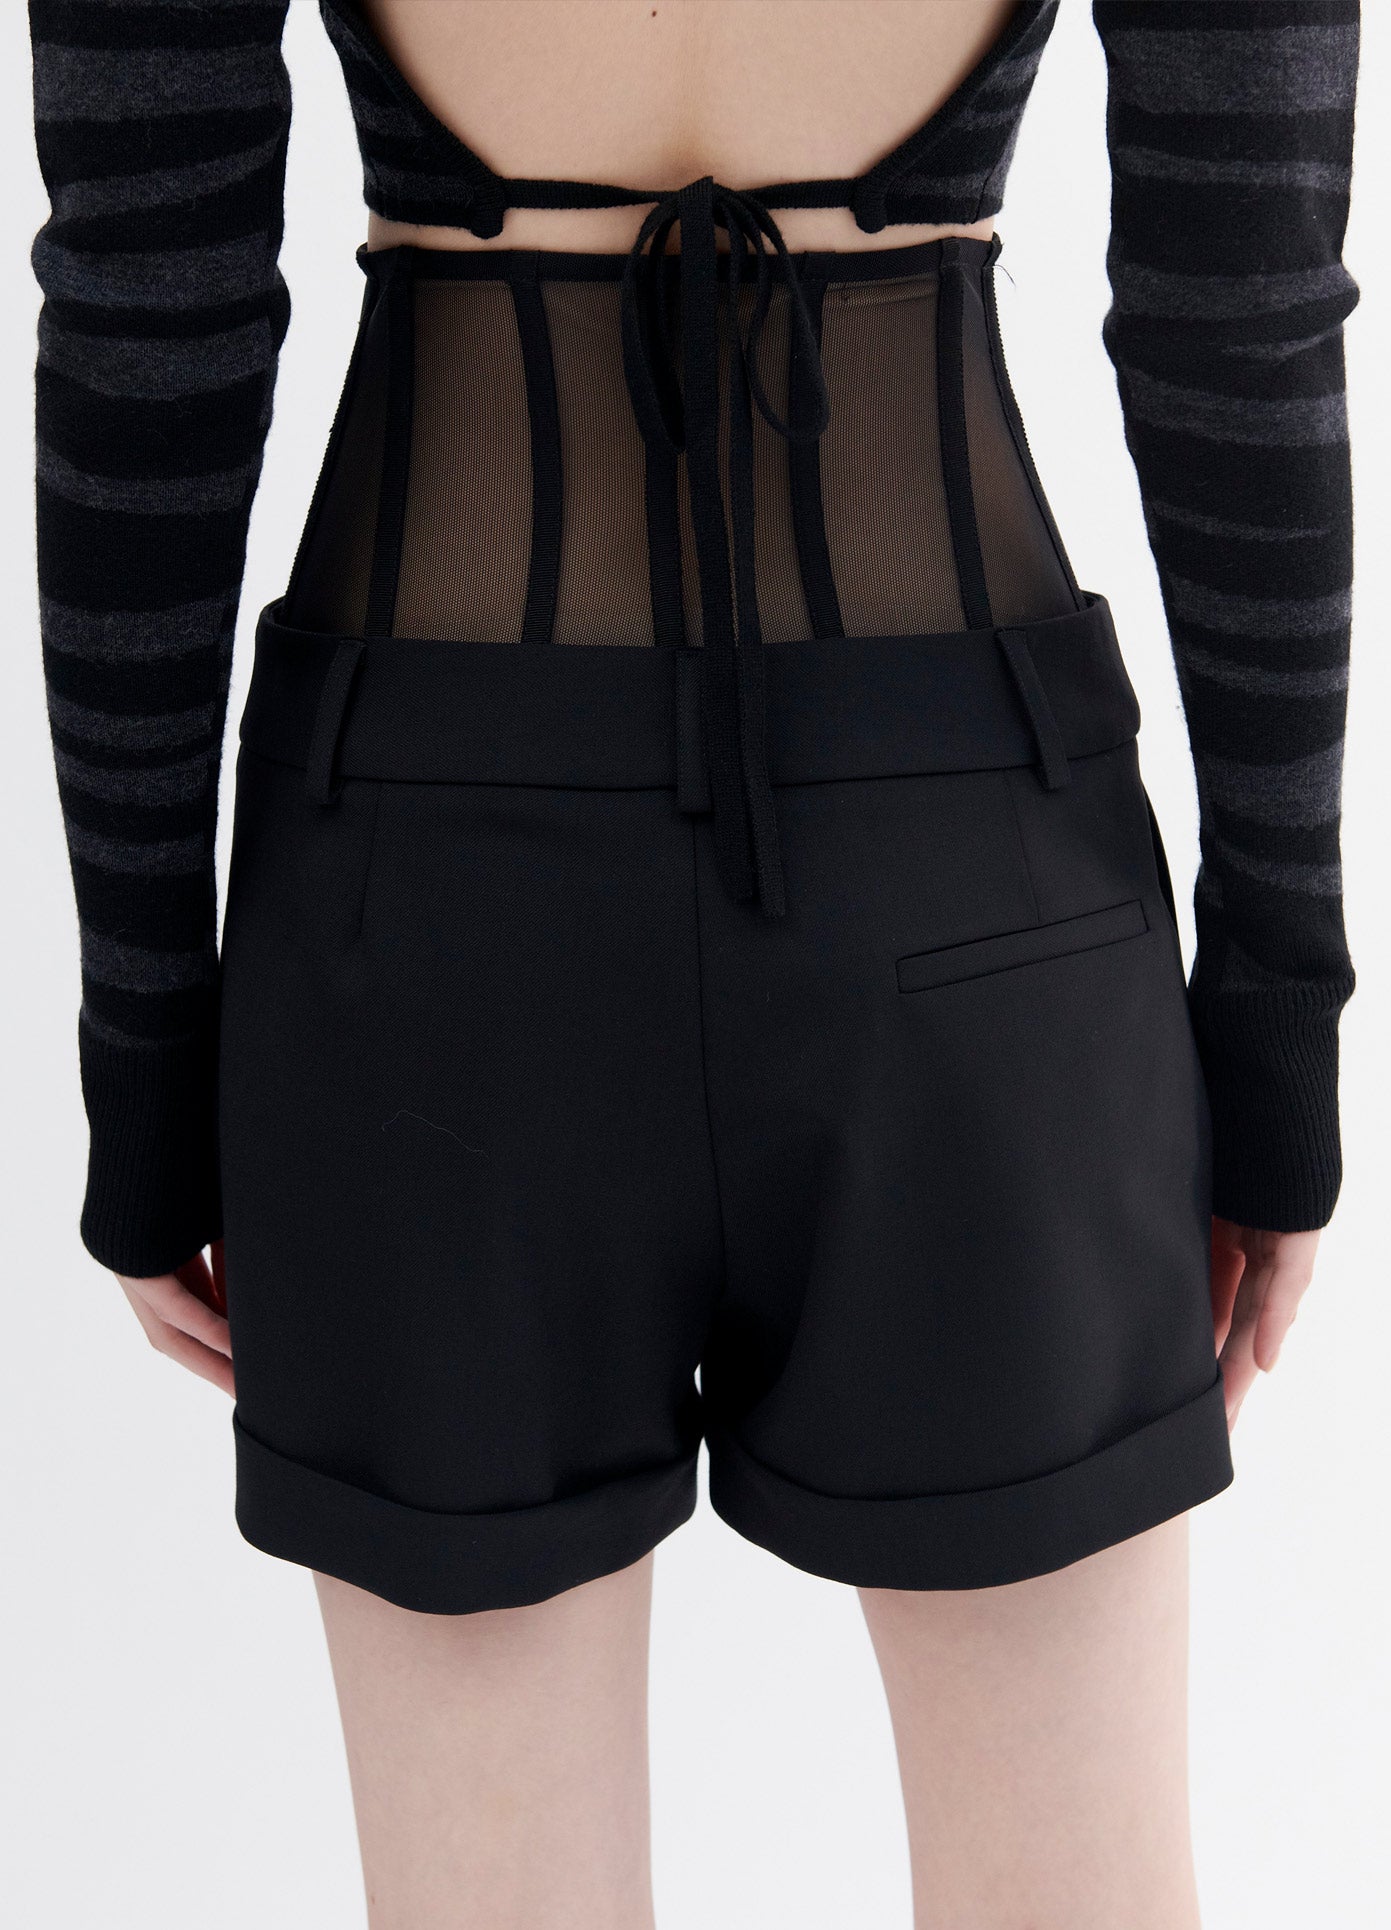 MONSE Bustier Shorts in Black on Model Back Detail View